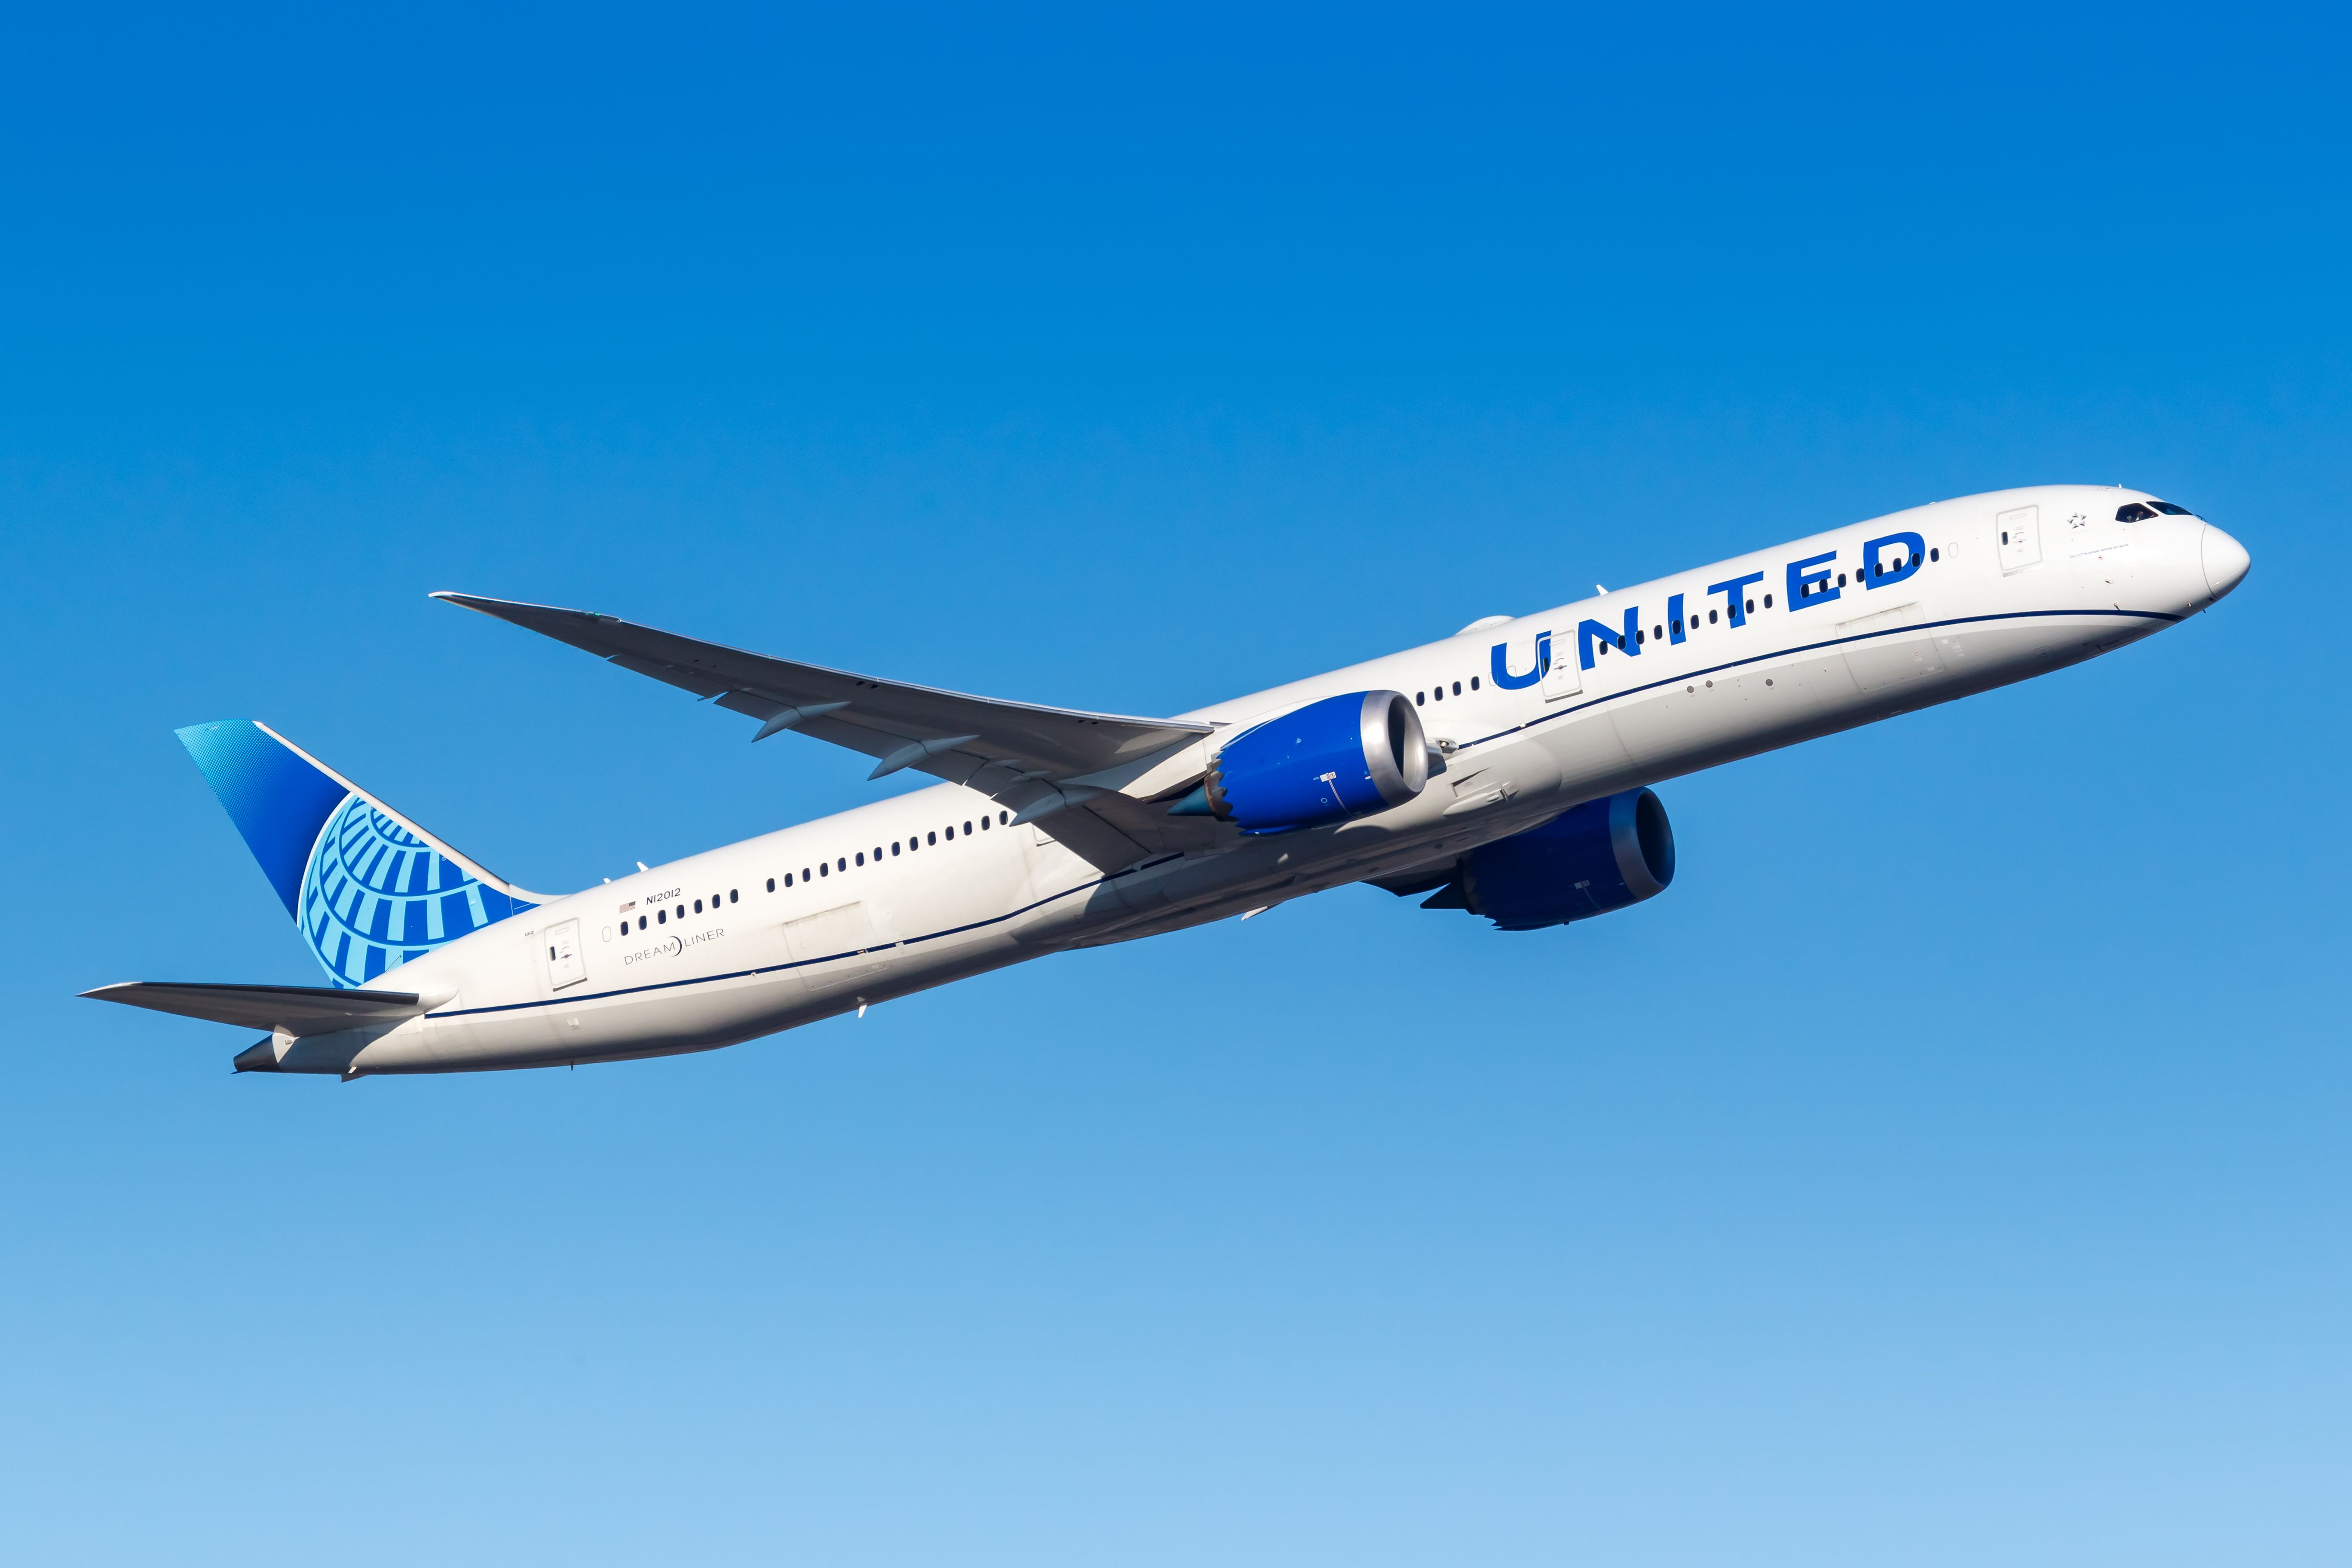 A United Airlines Boeing 787-10 flying in the sky.